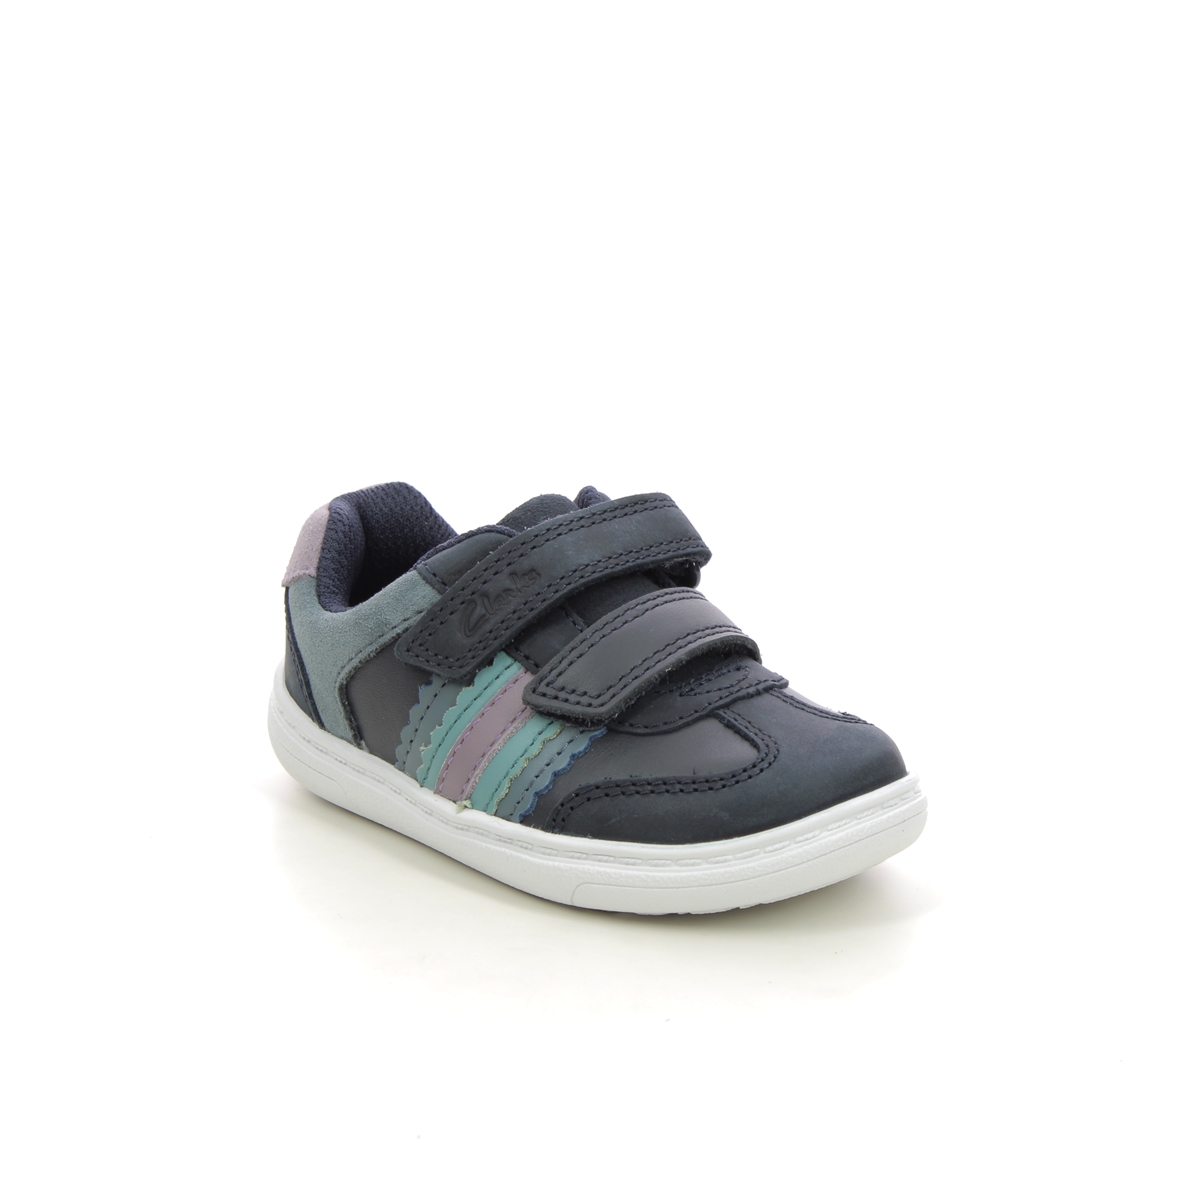 Clarks Flash Band T Navy Leather Kids First And Toddler 753956F In Size 4.5 In Plain Navy Leather F Width Fitting Regular Fit For kids